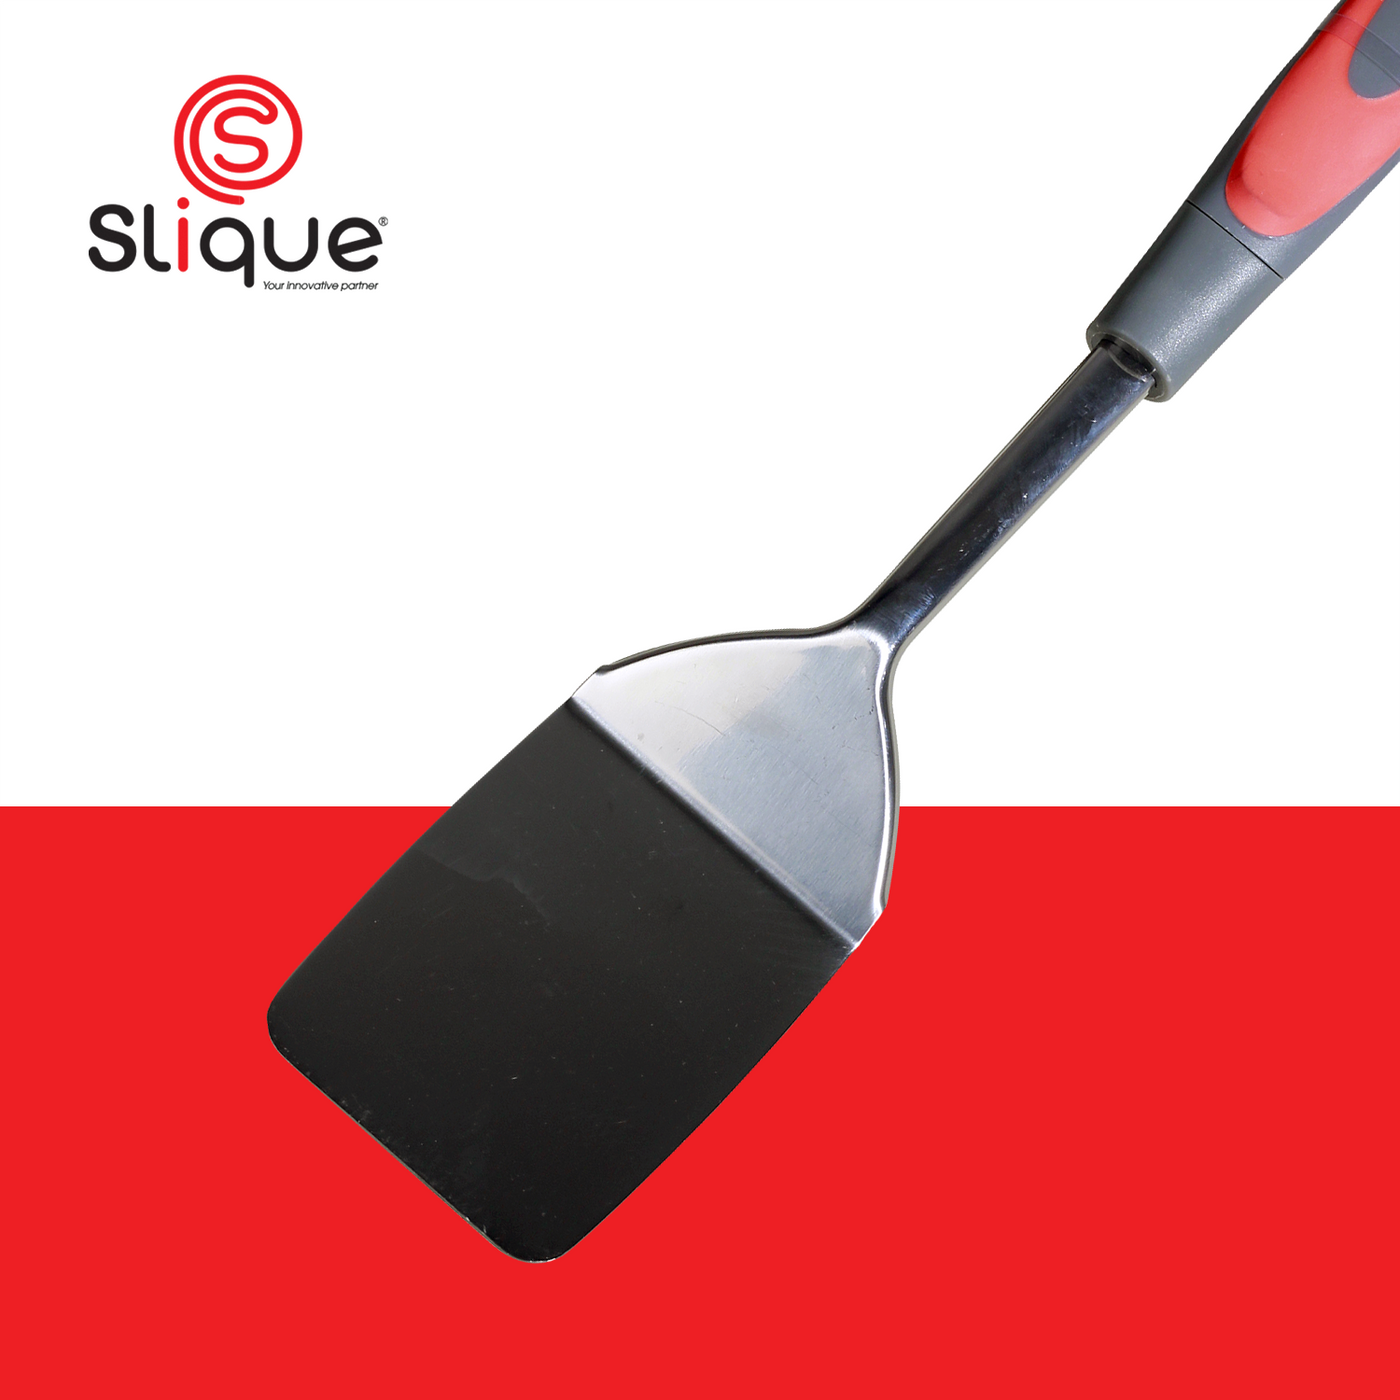 SLIQUE Premium 18/8 Stainless Steel Turner TPR Silicone Handle Kitchen Essentials Amazing Gift Idea For Any Occasion! (Red)